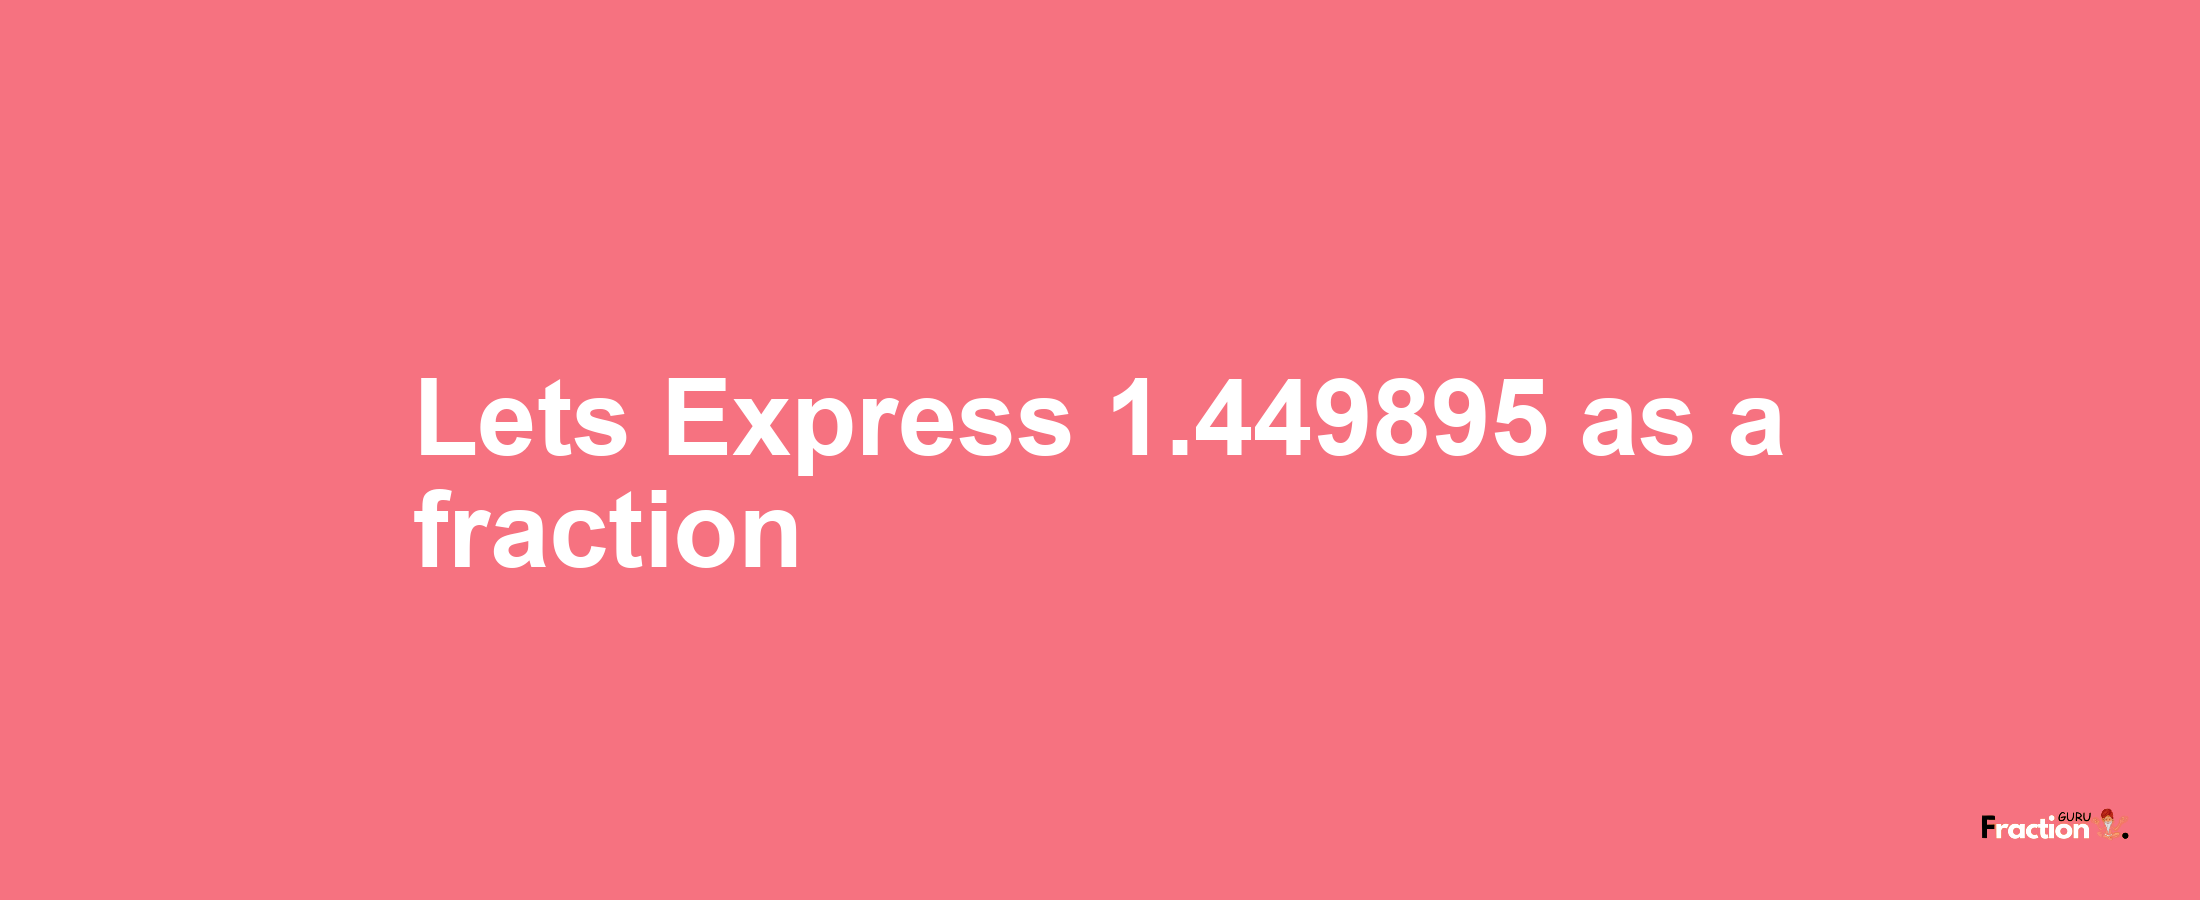 Lets Express 1.449895 as afraction